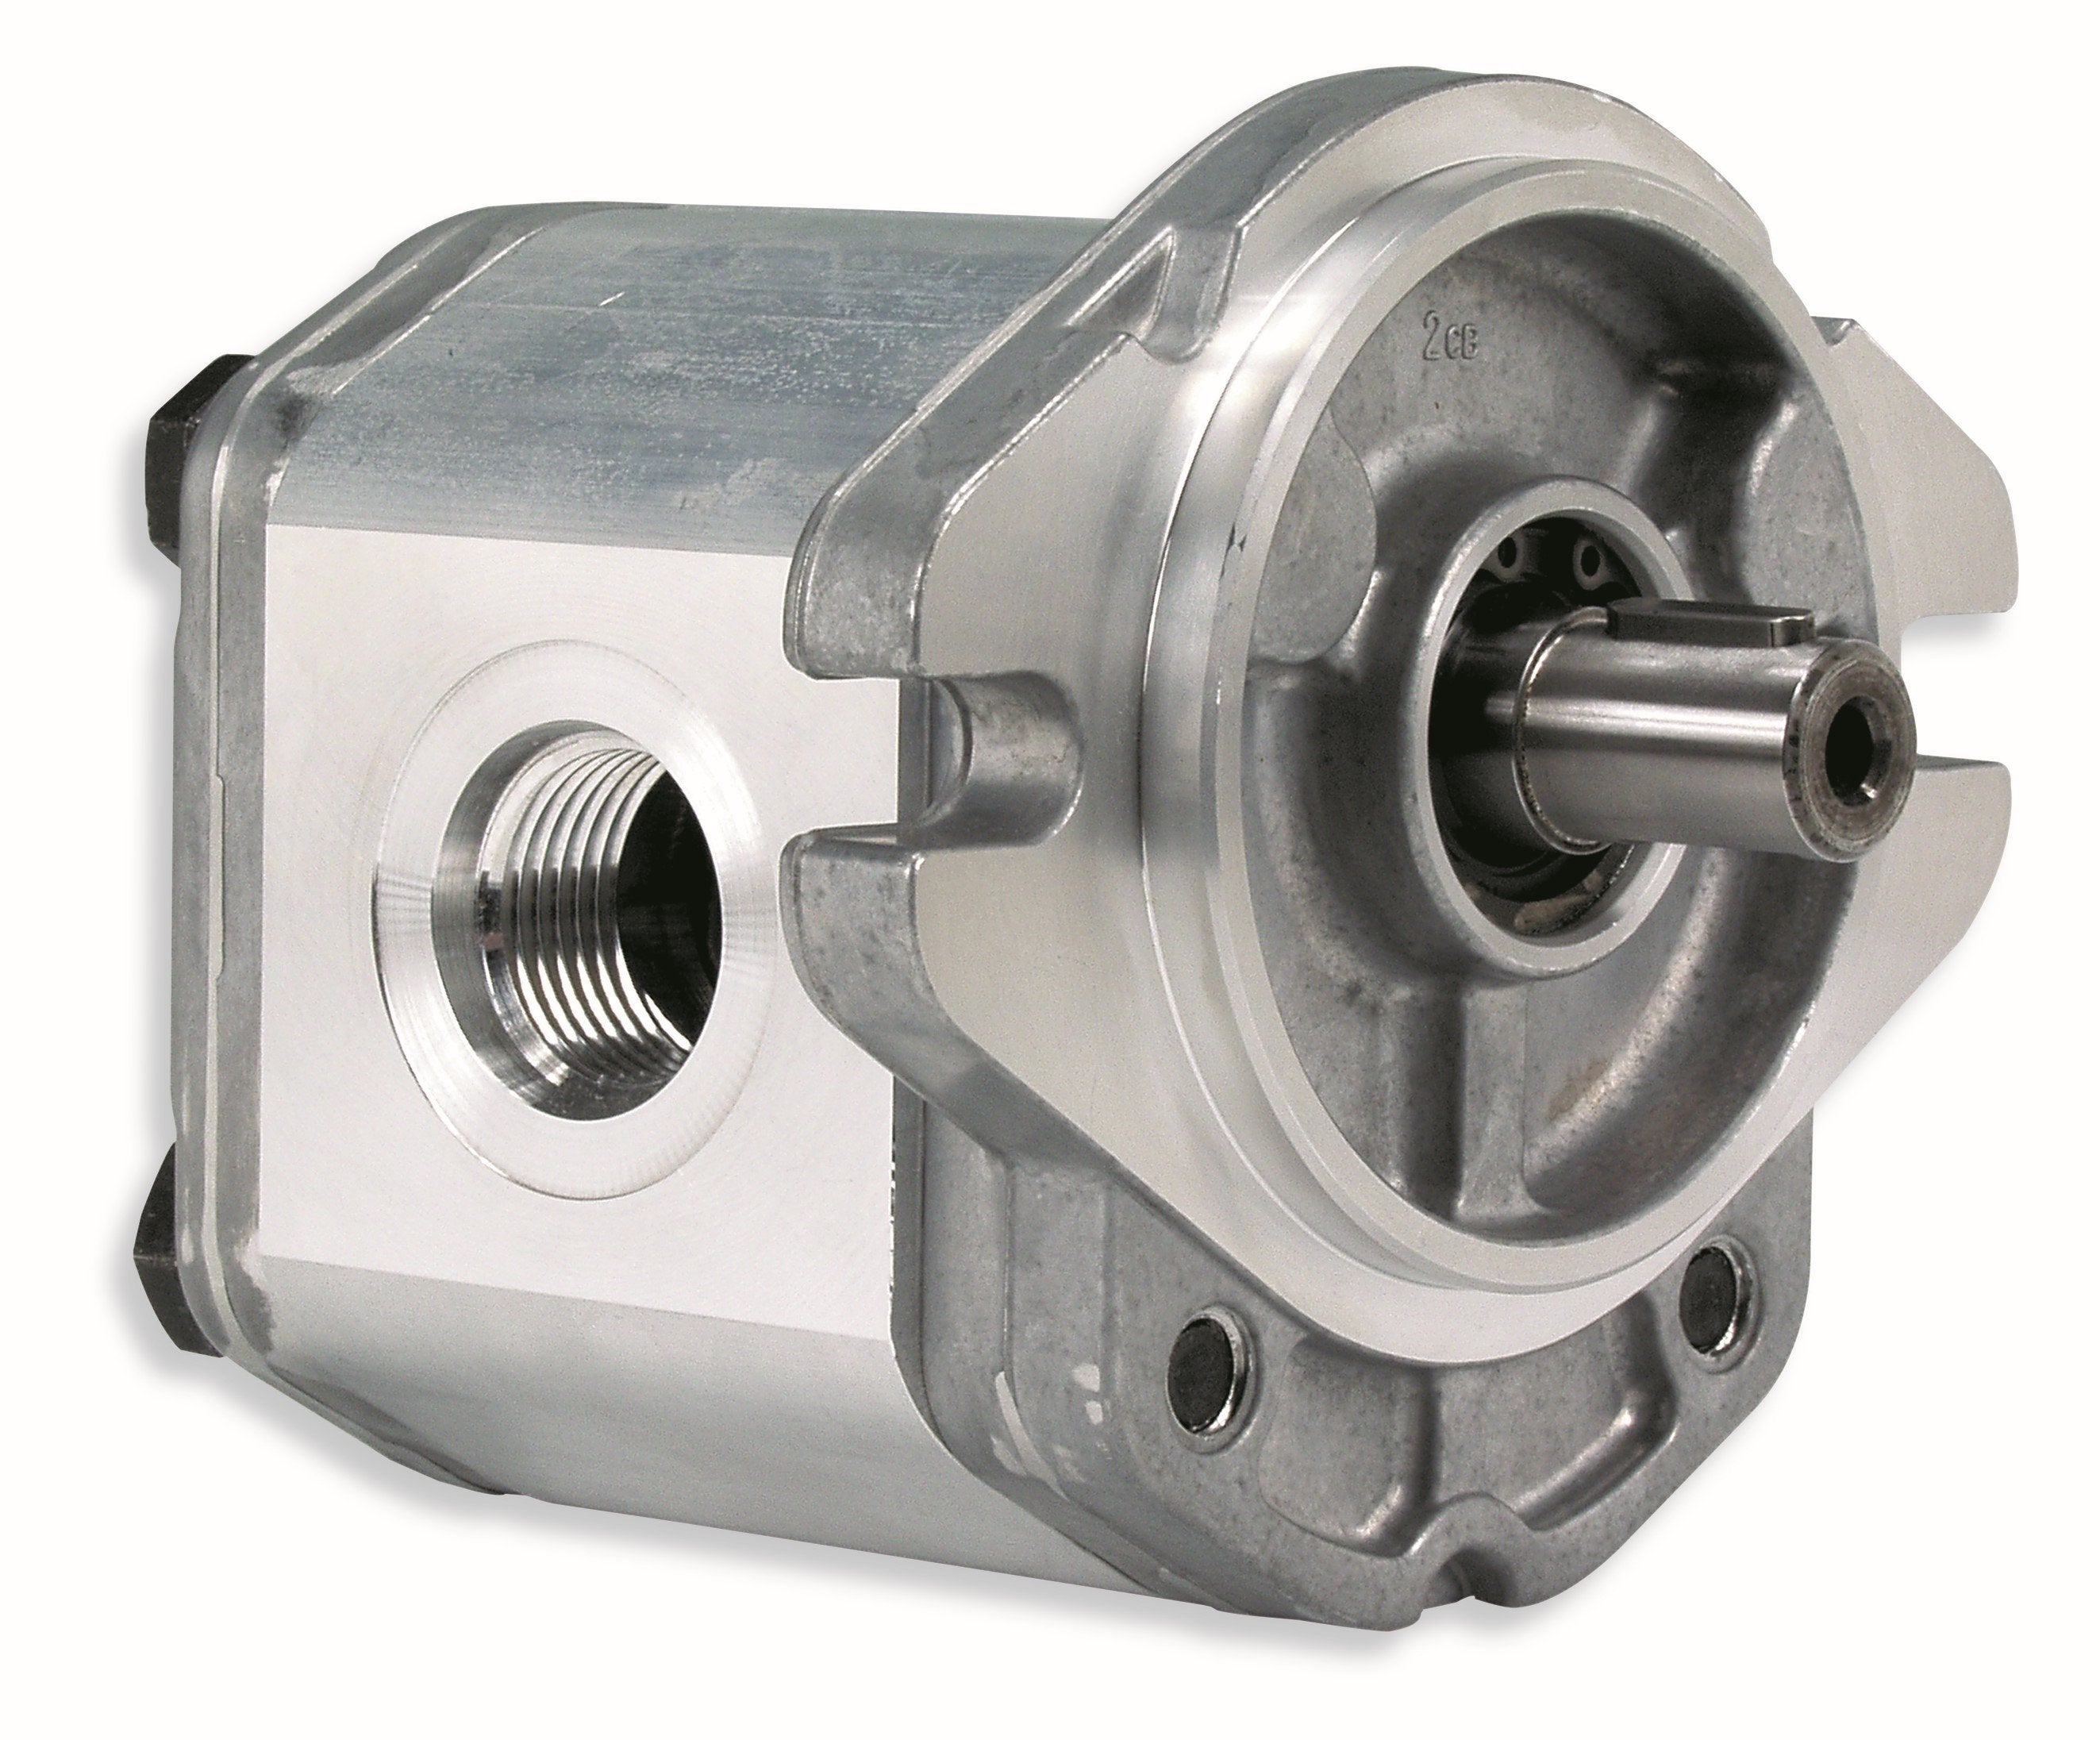 GHM3A-R-66-S1-FA-E4 : Marzocchi Gear Motor, Bidirectional, 44cc, 3625psi rated, 2800RPM, 1.25" #20 SAE ports, 13T 16/32DP Splined Shaft